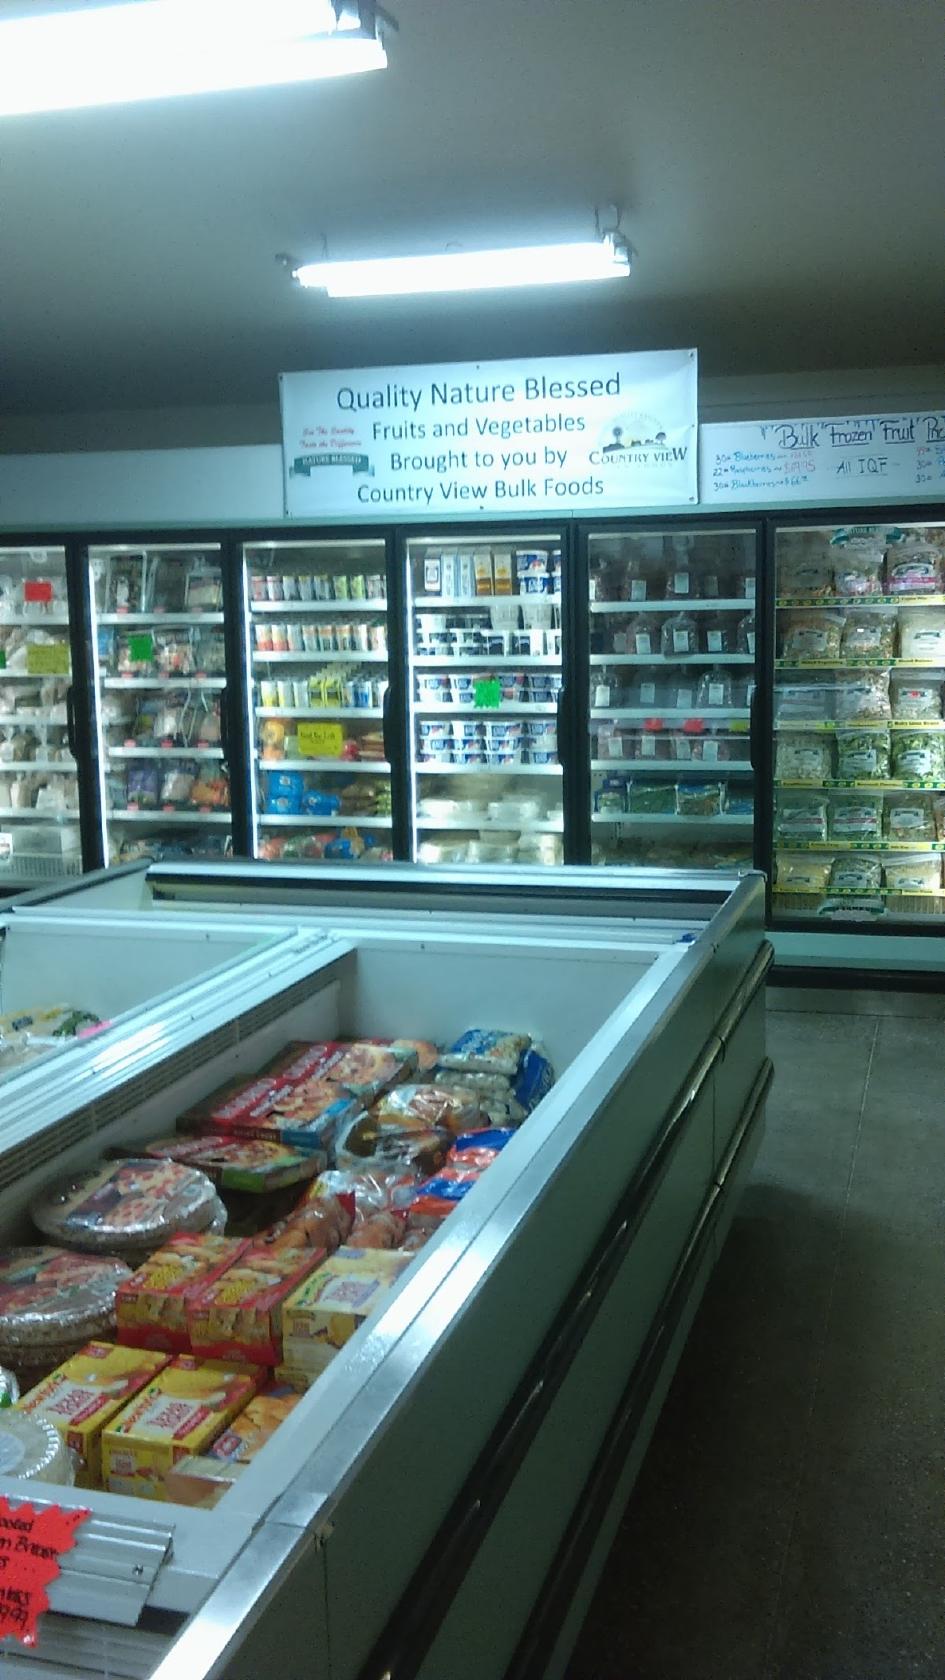 Country View Bulk Foods is worth the trip